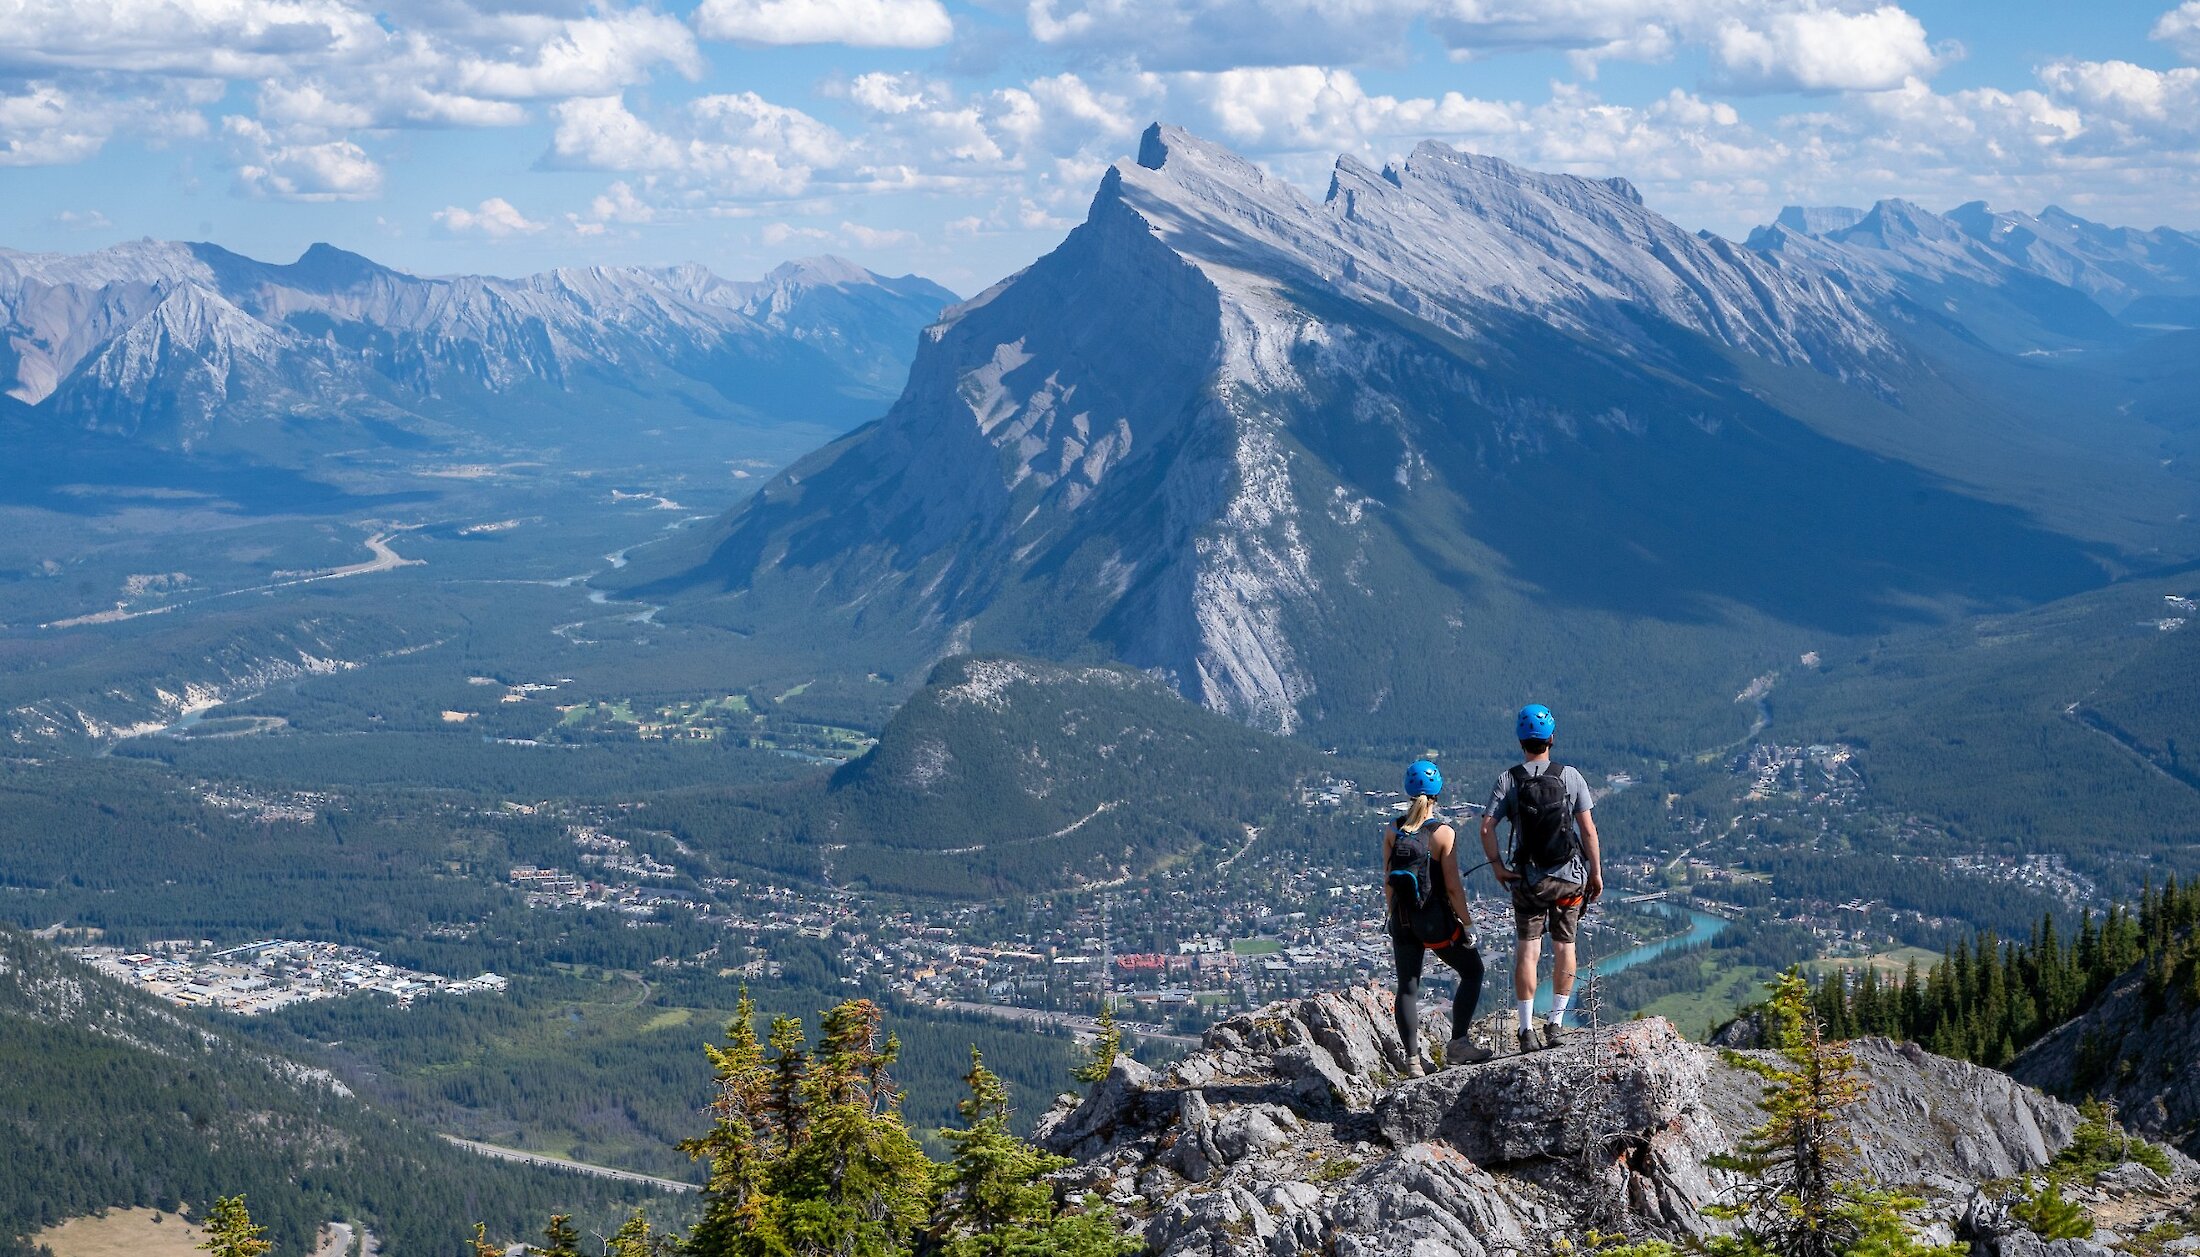 Views from the top of Mount Norquay on a Via Ferrata tour